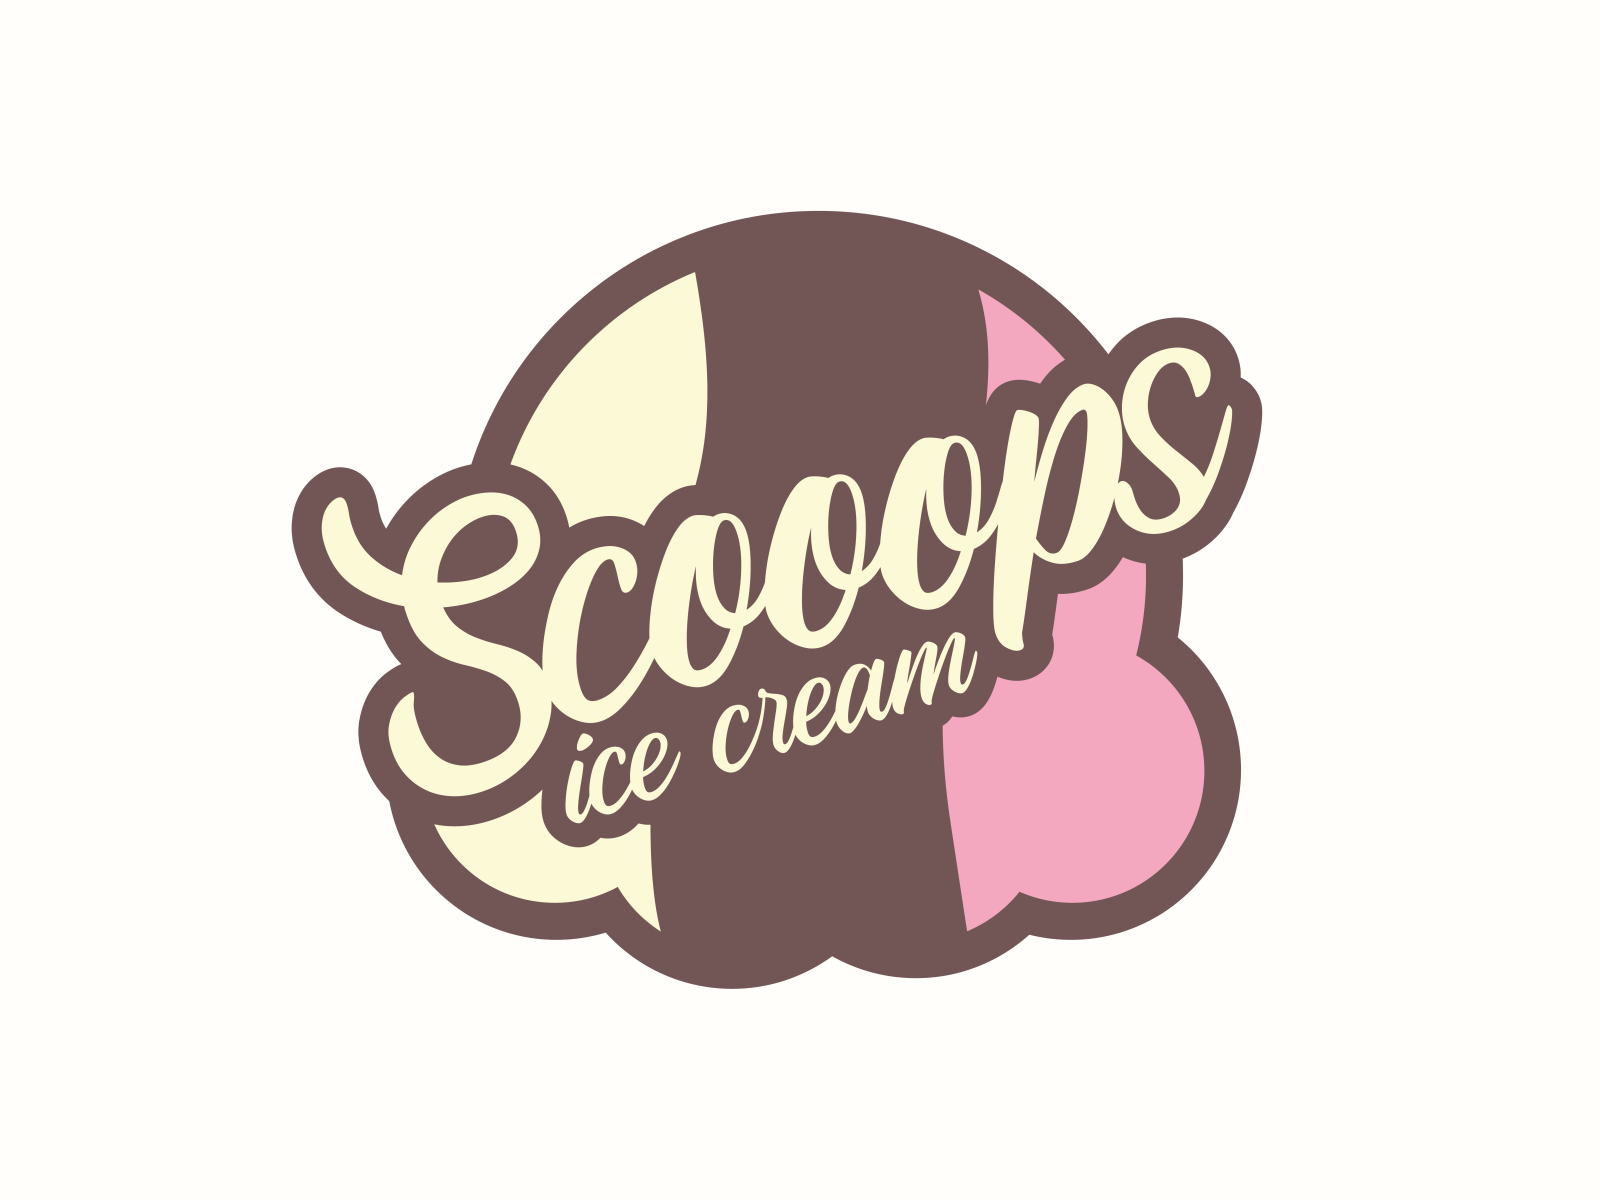 Day 2750 Ice Cream Company By Vaughn Chambers On Dribbble 6314